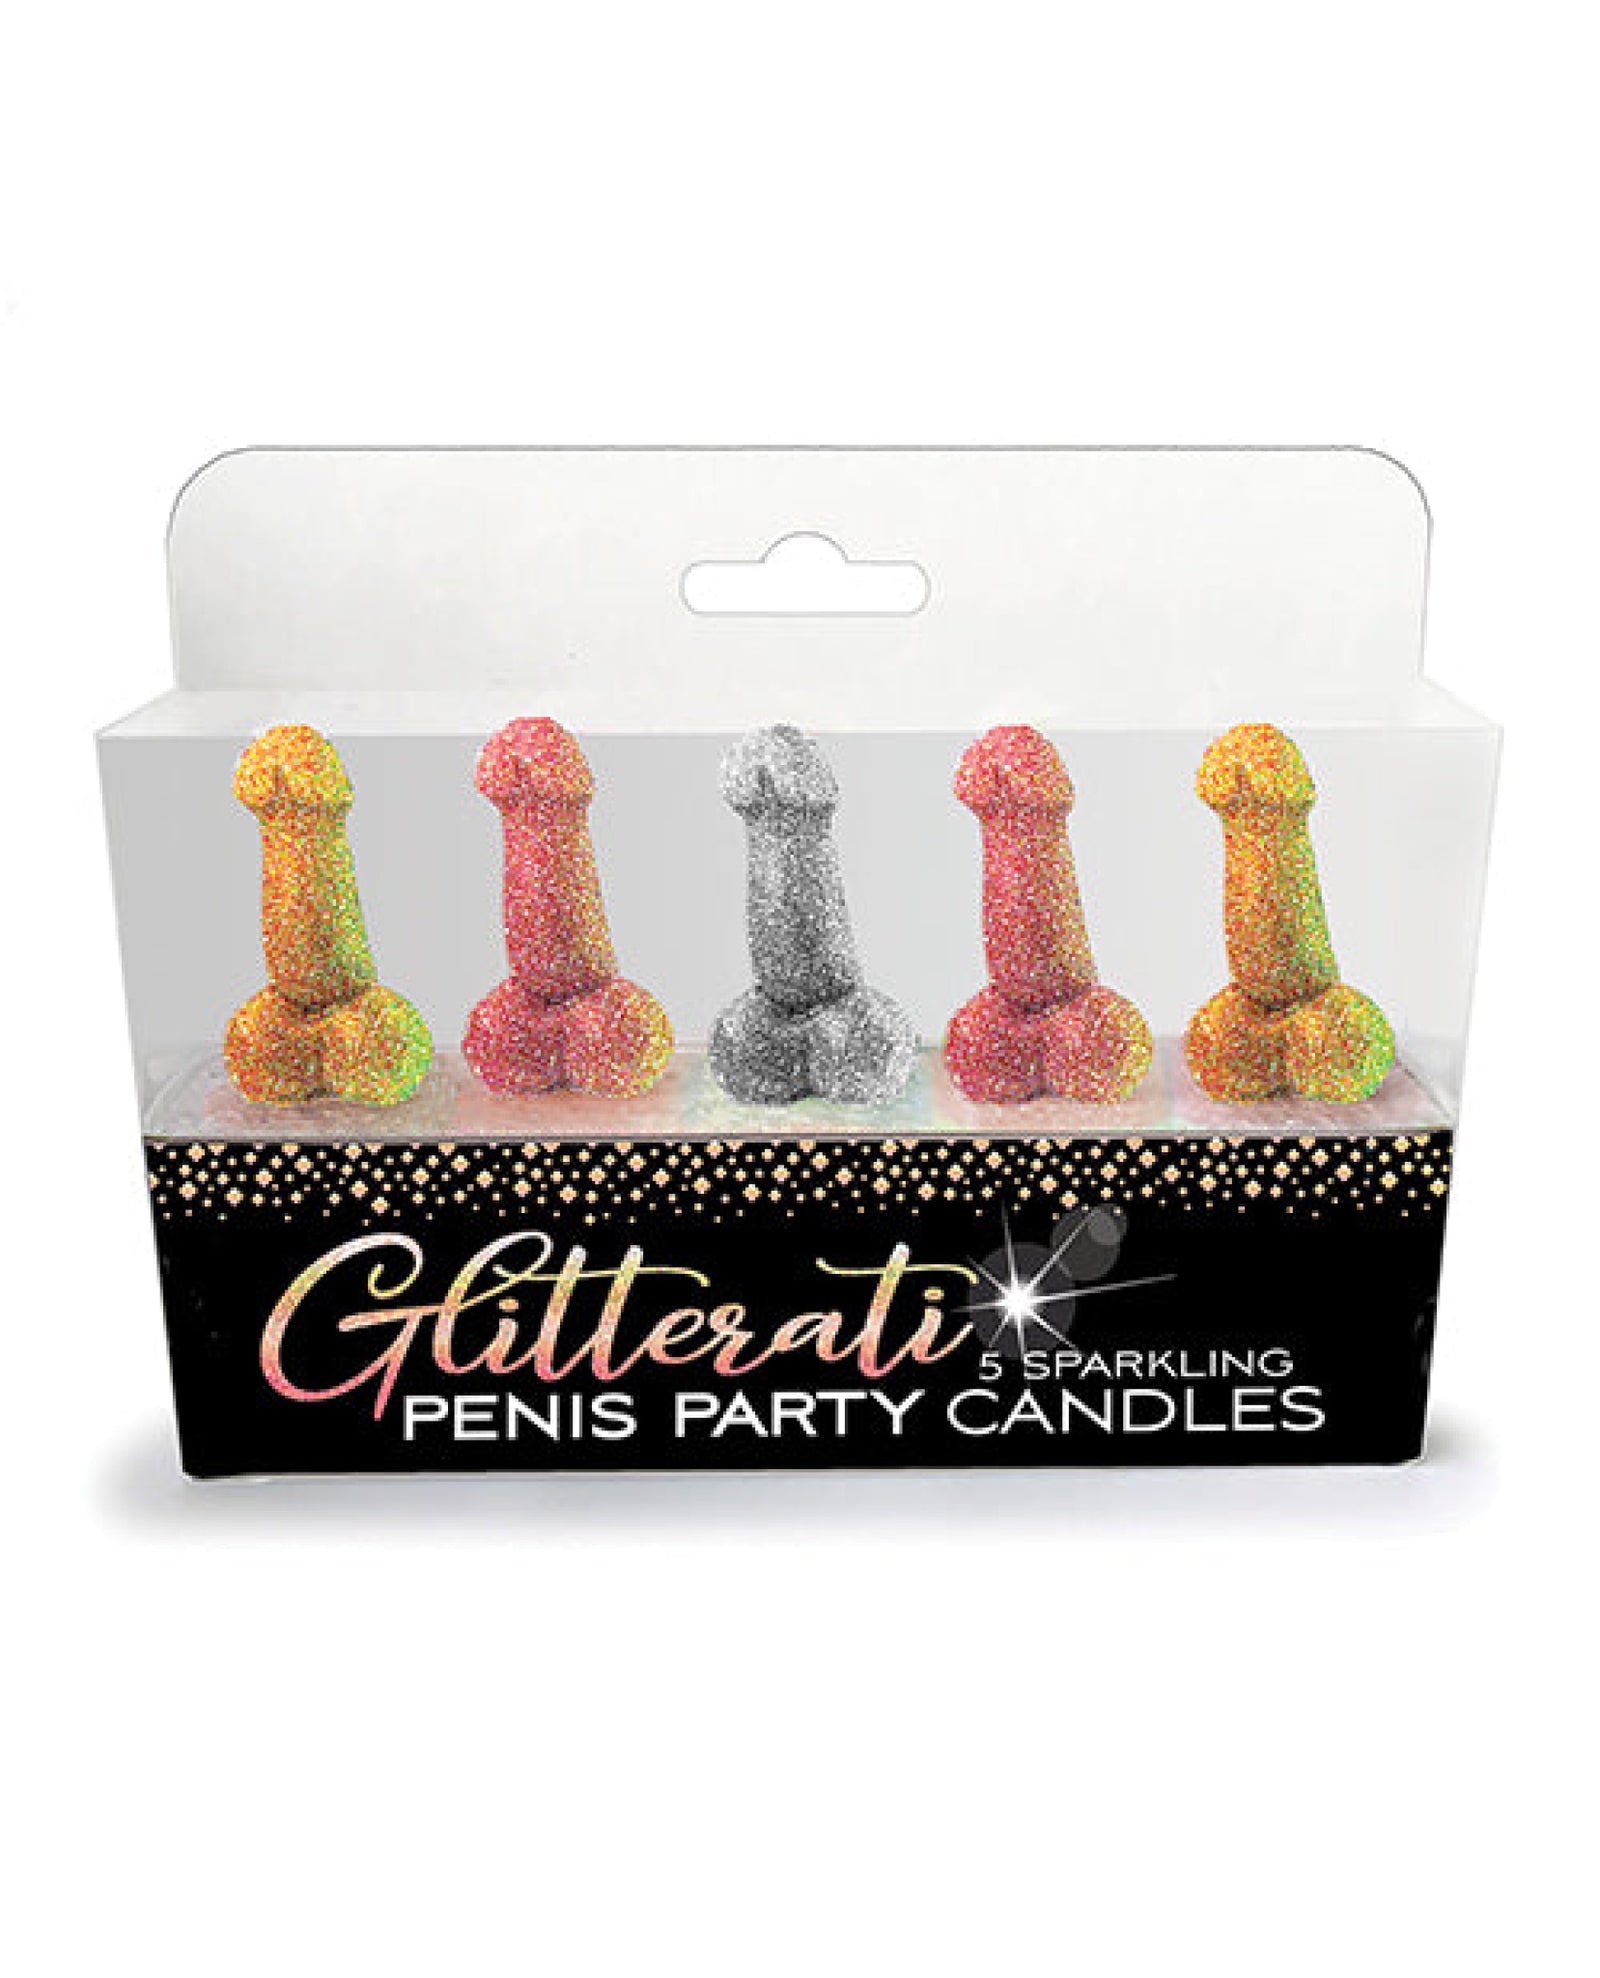 Glitterati Penis Party Candle - Pack Of 5 Little Genie